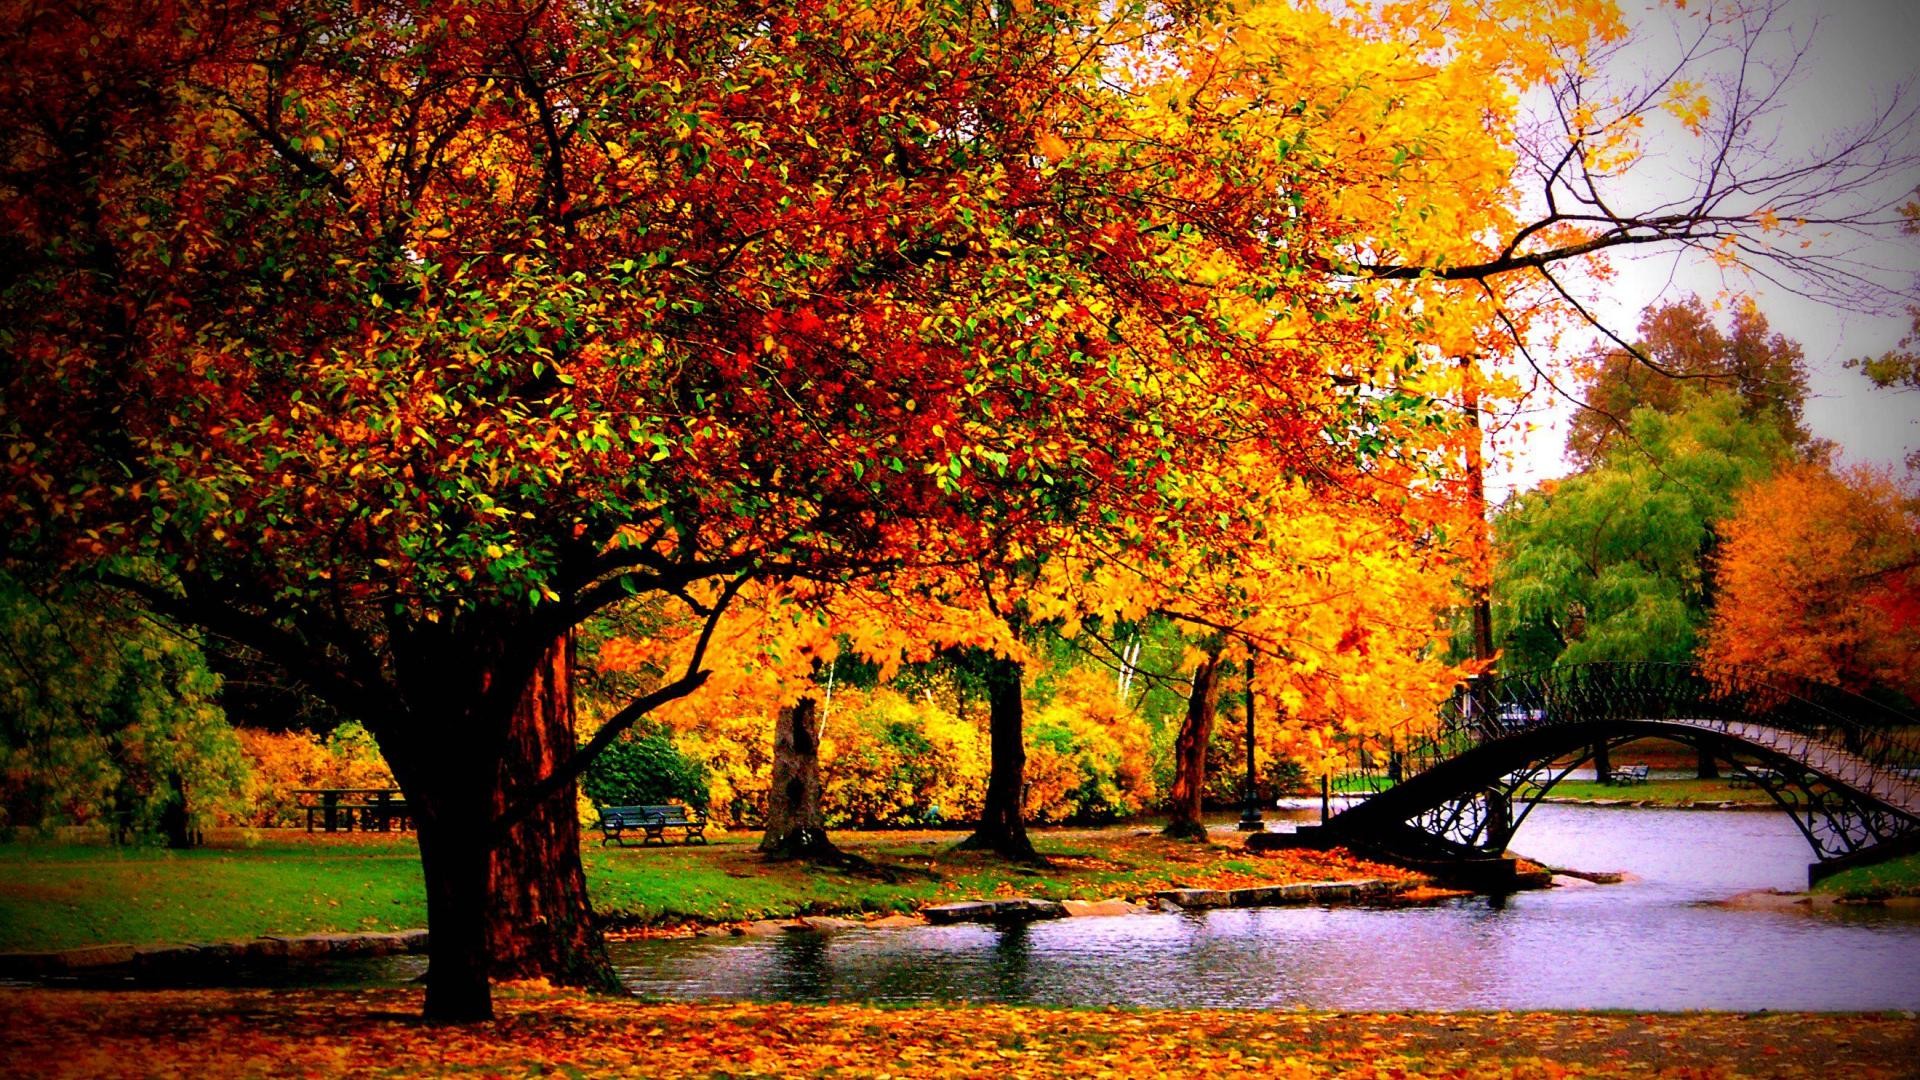 1920x1080 ... 25 Autumn Wallpapers, Backgrounds, Images, Pictures | Design .